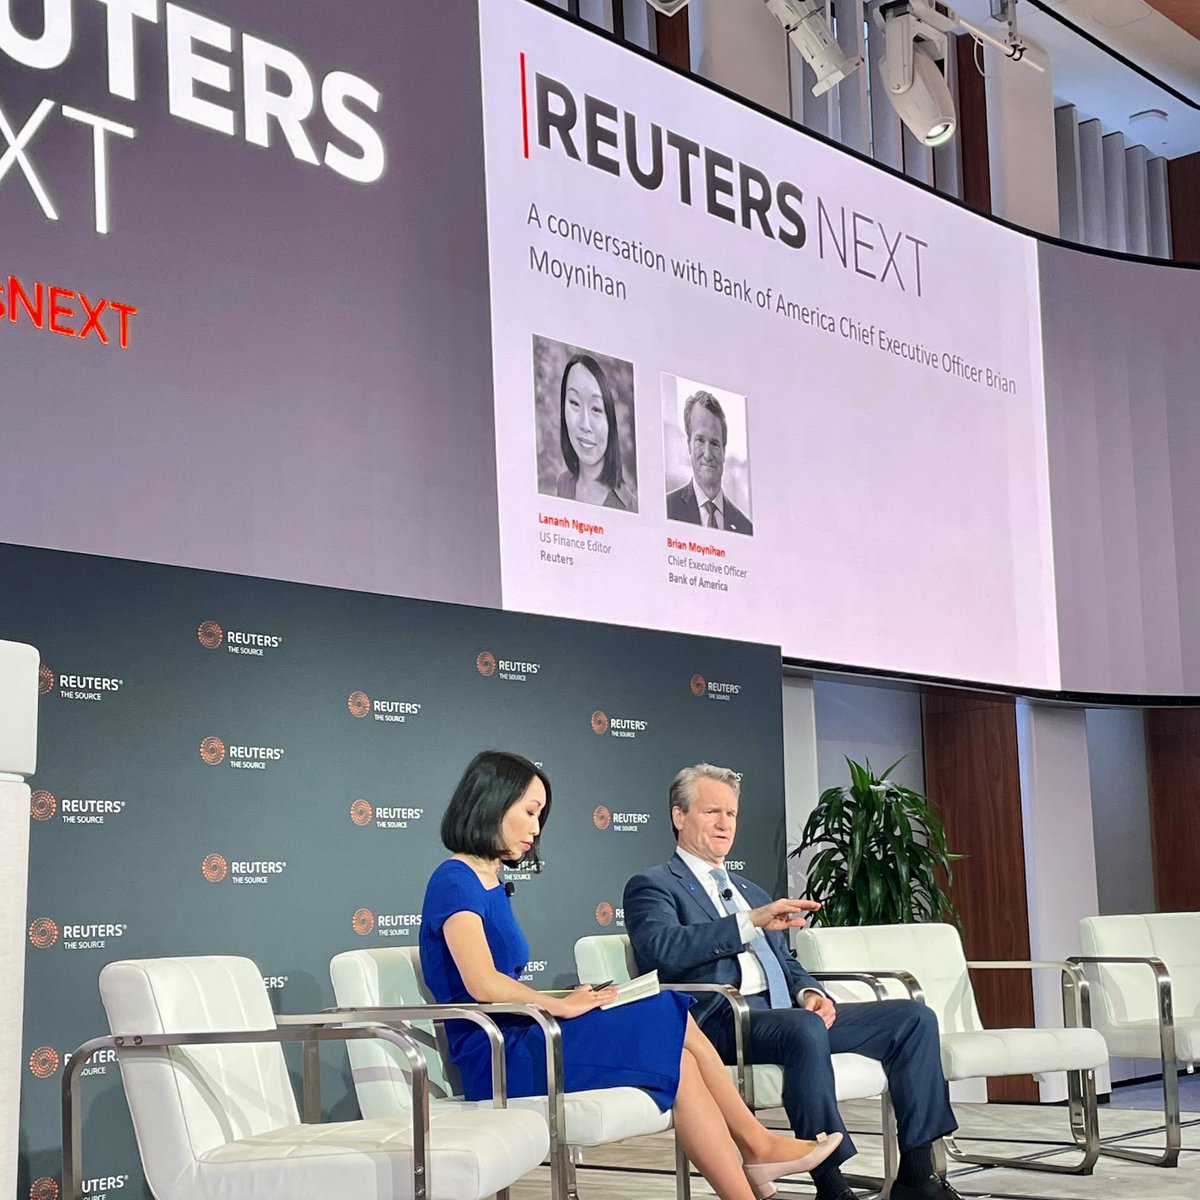 CEO Brian Moynihan joined @LananhTNguyen at the @Reuters NEXT conference where he discussed a number of topics including the #economy, bank capital requirements, interest rates and more.